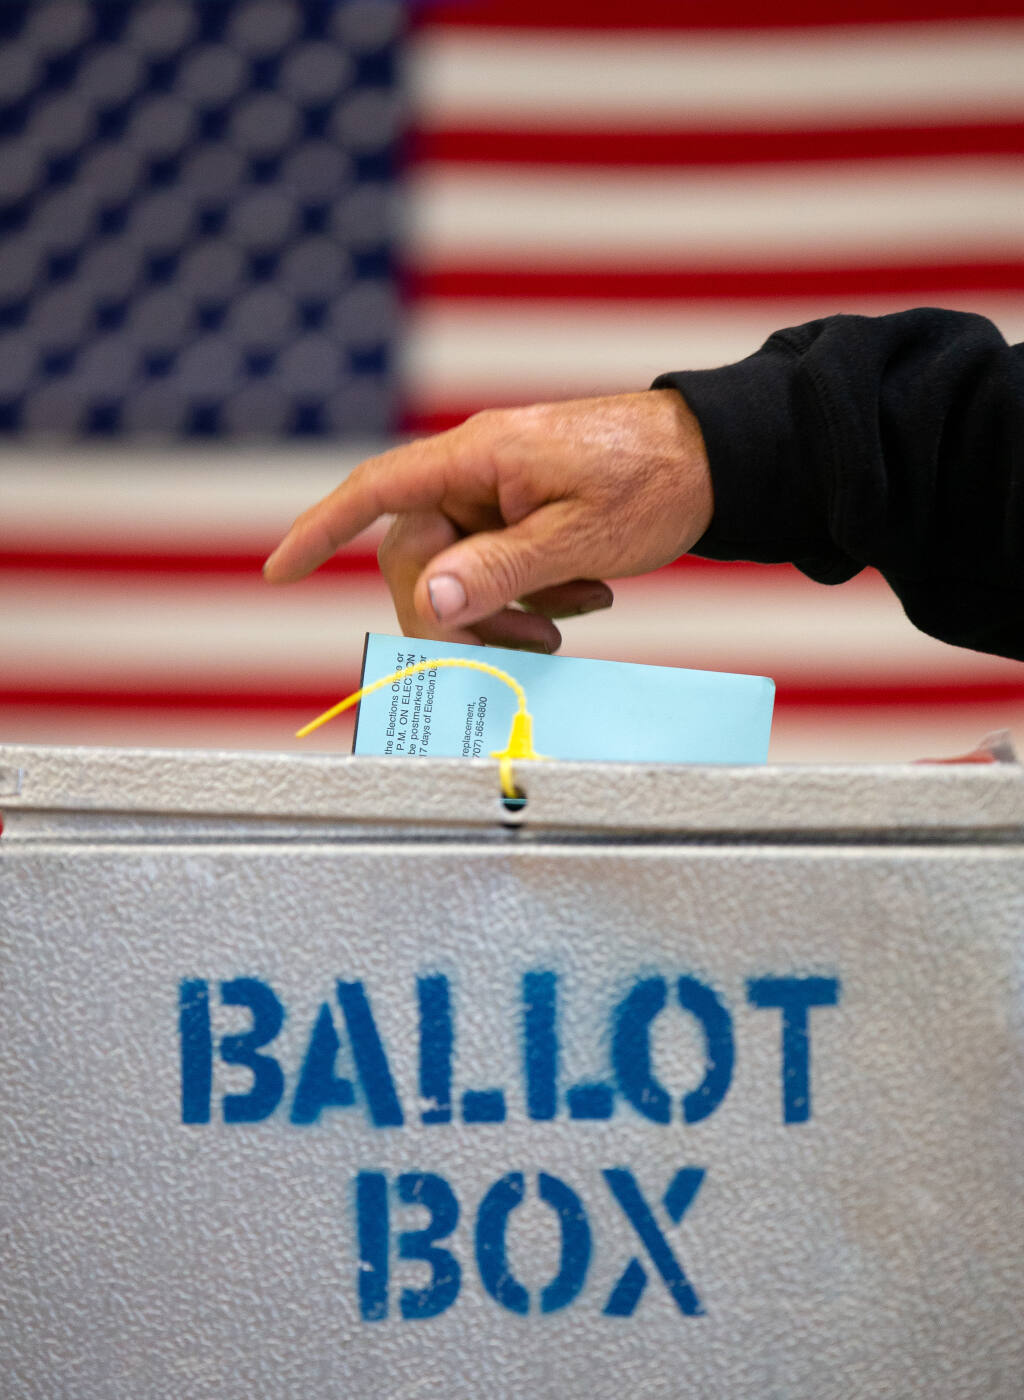 Bryan Asch of Santa Rosa personally places his mail-in ballot into a ballot box at the Sonoma County Fairgrounds on Election Day in Santa Rosa, California, on Tuesday, November 3, 2020. (Alvin A.H. Jornada / The Press Democrat)